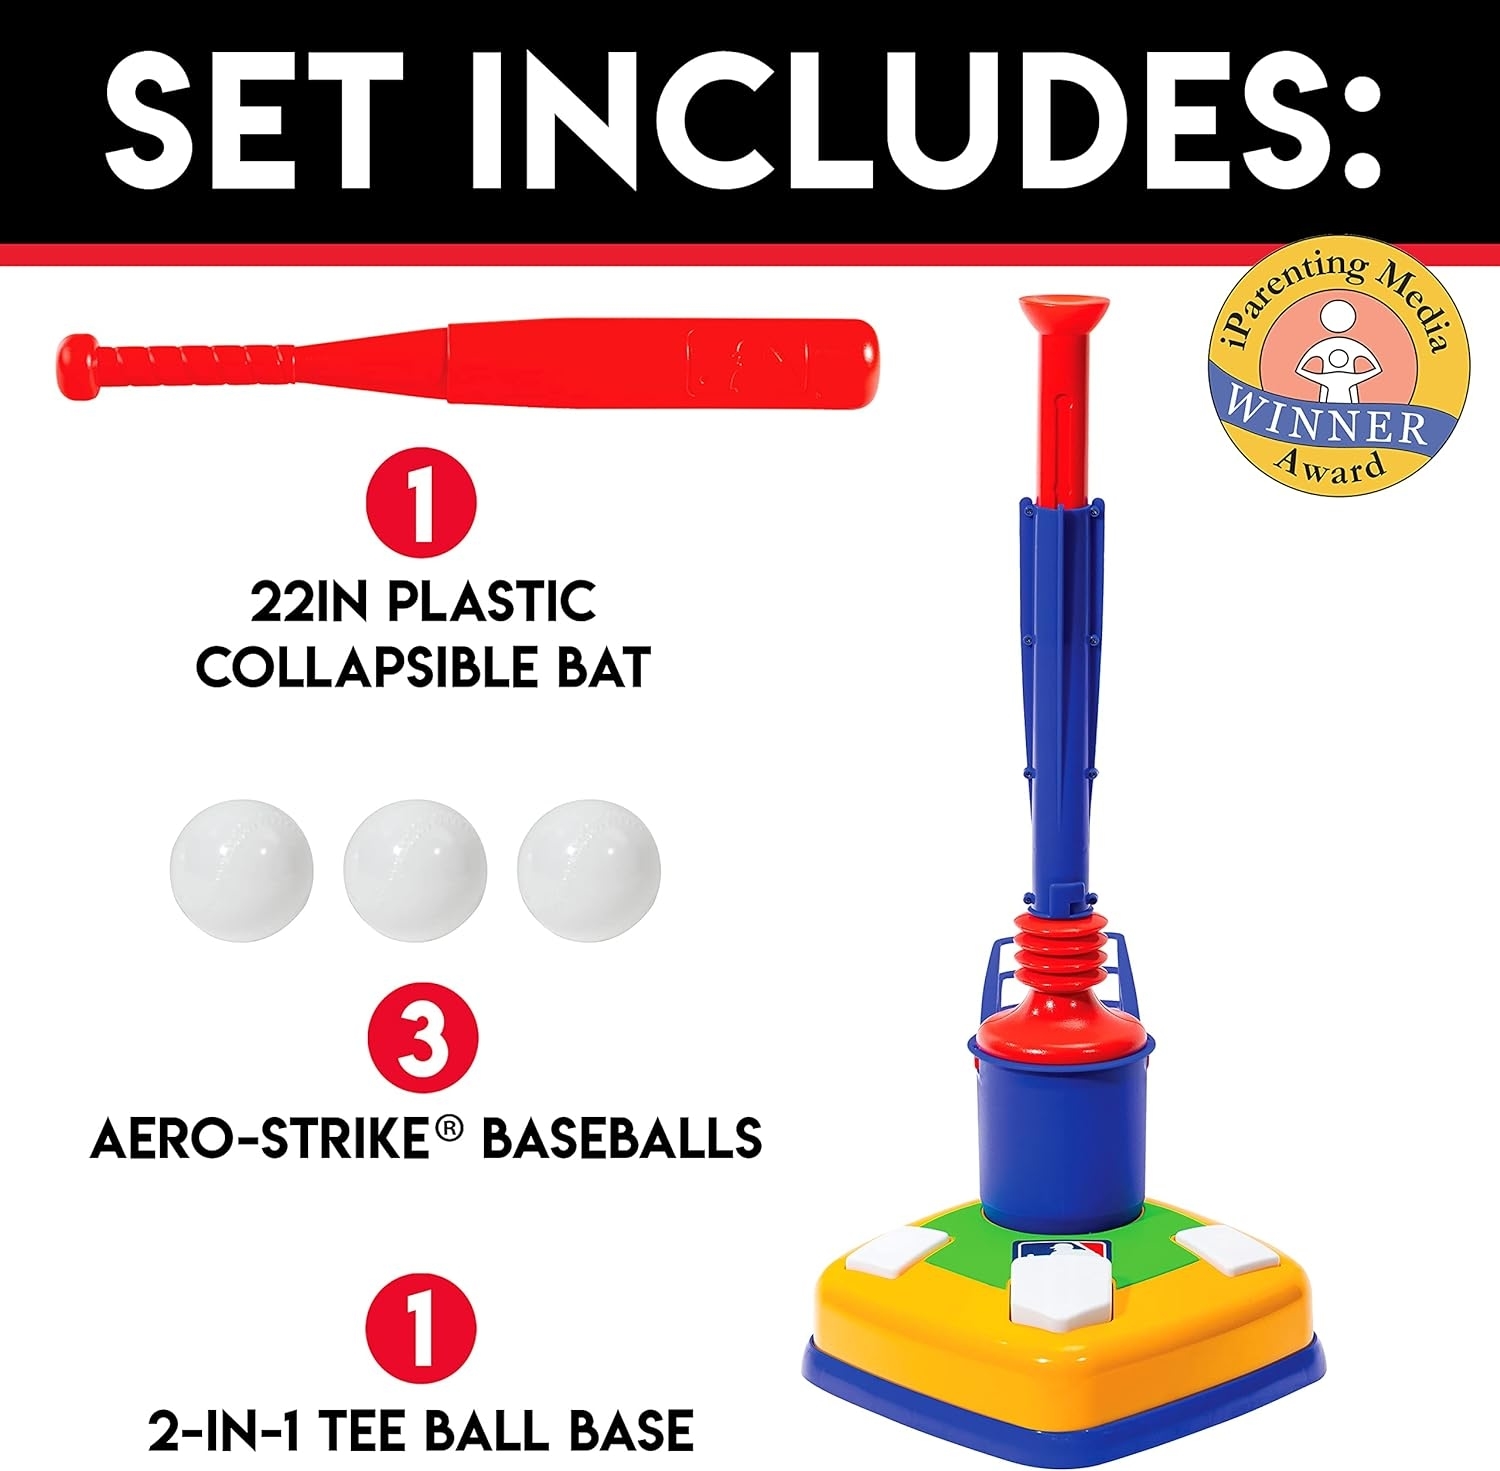 Plastic baseball set with collapsible bat, three balls, and 2-in-1 tee base